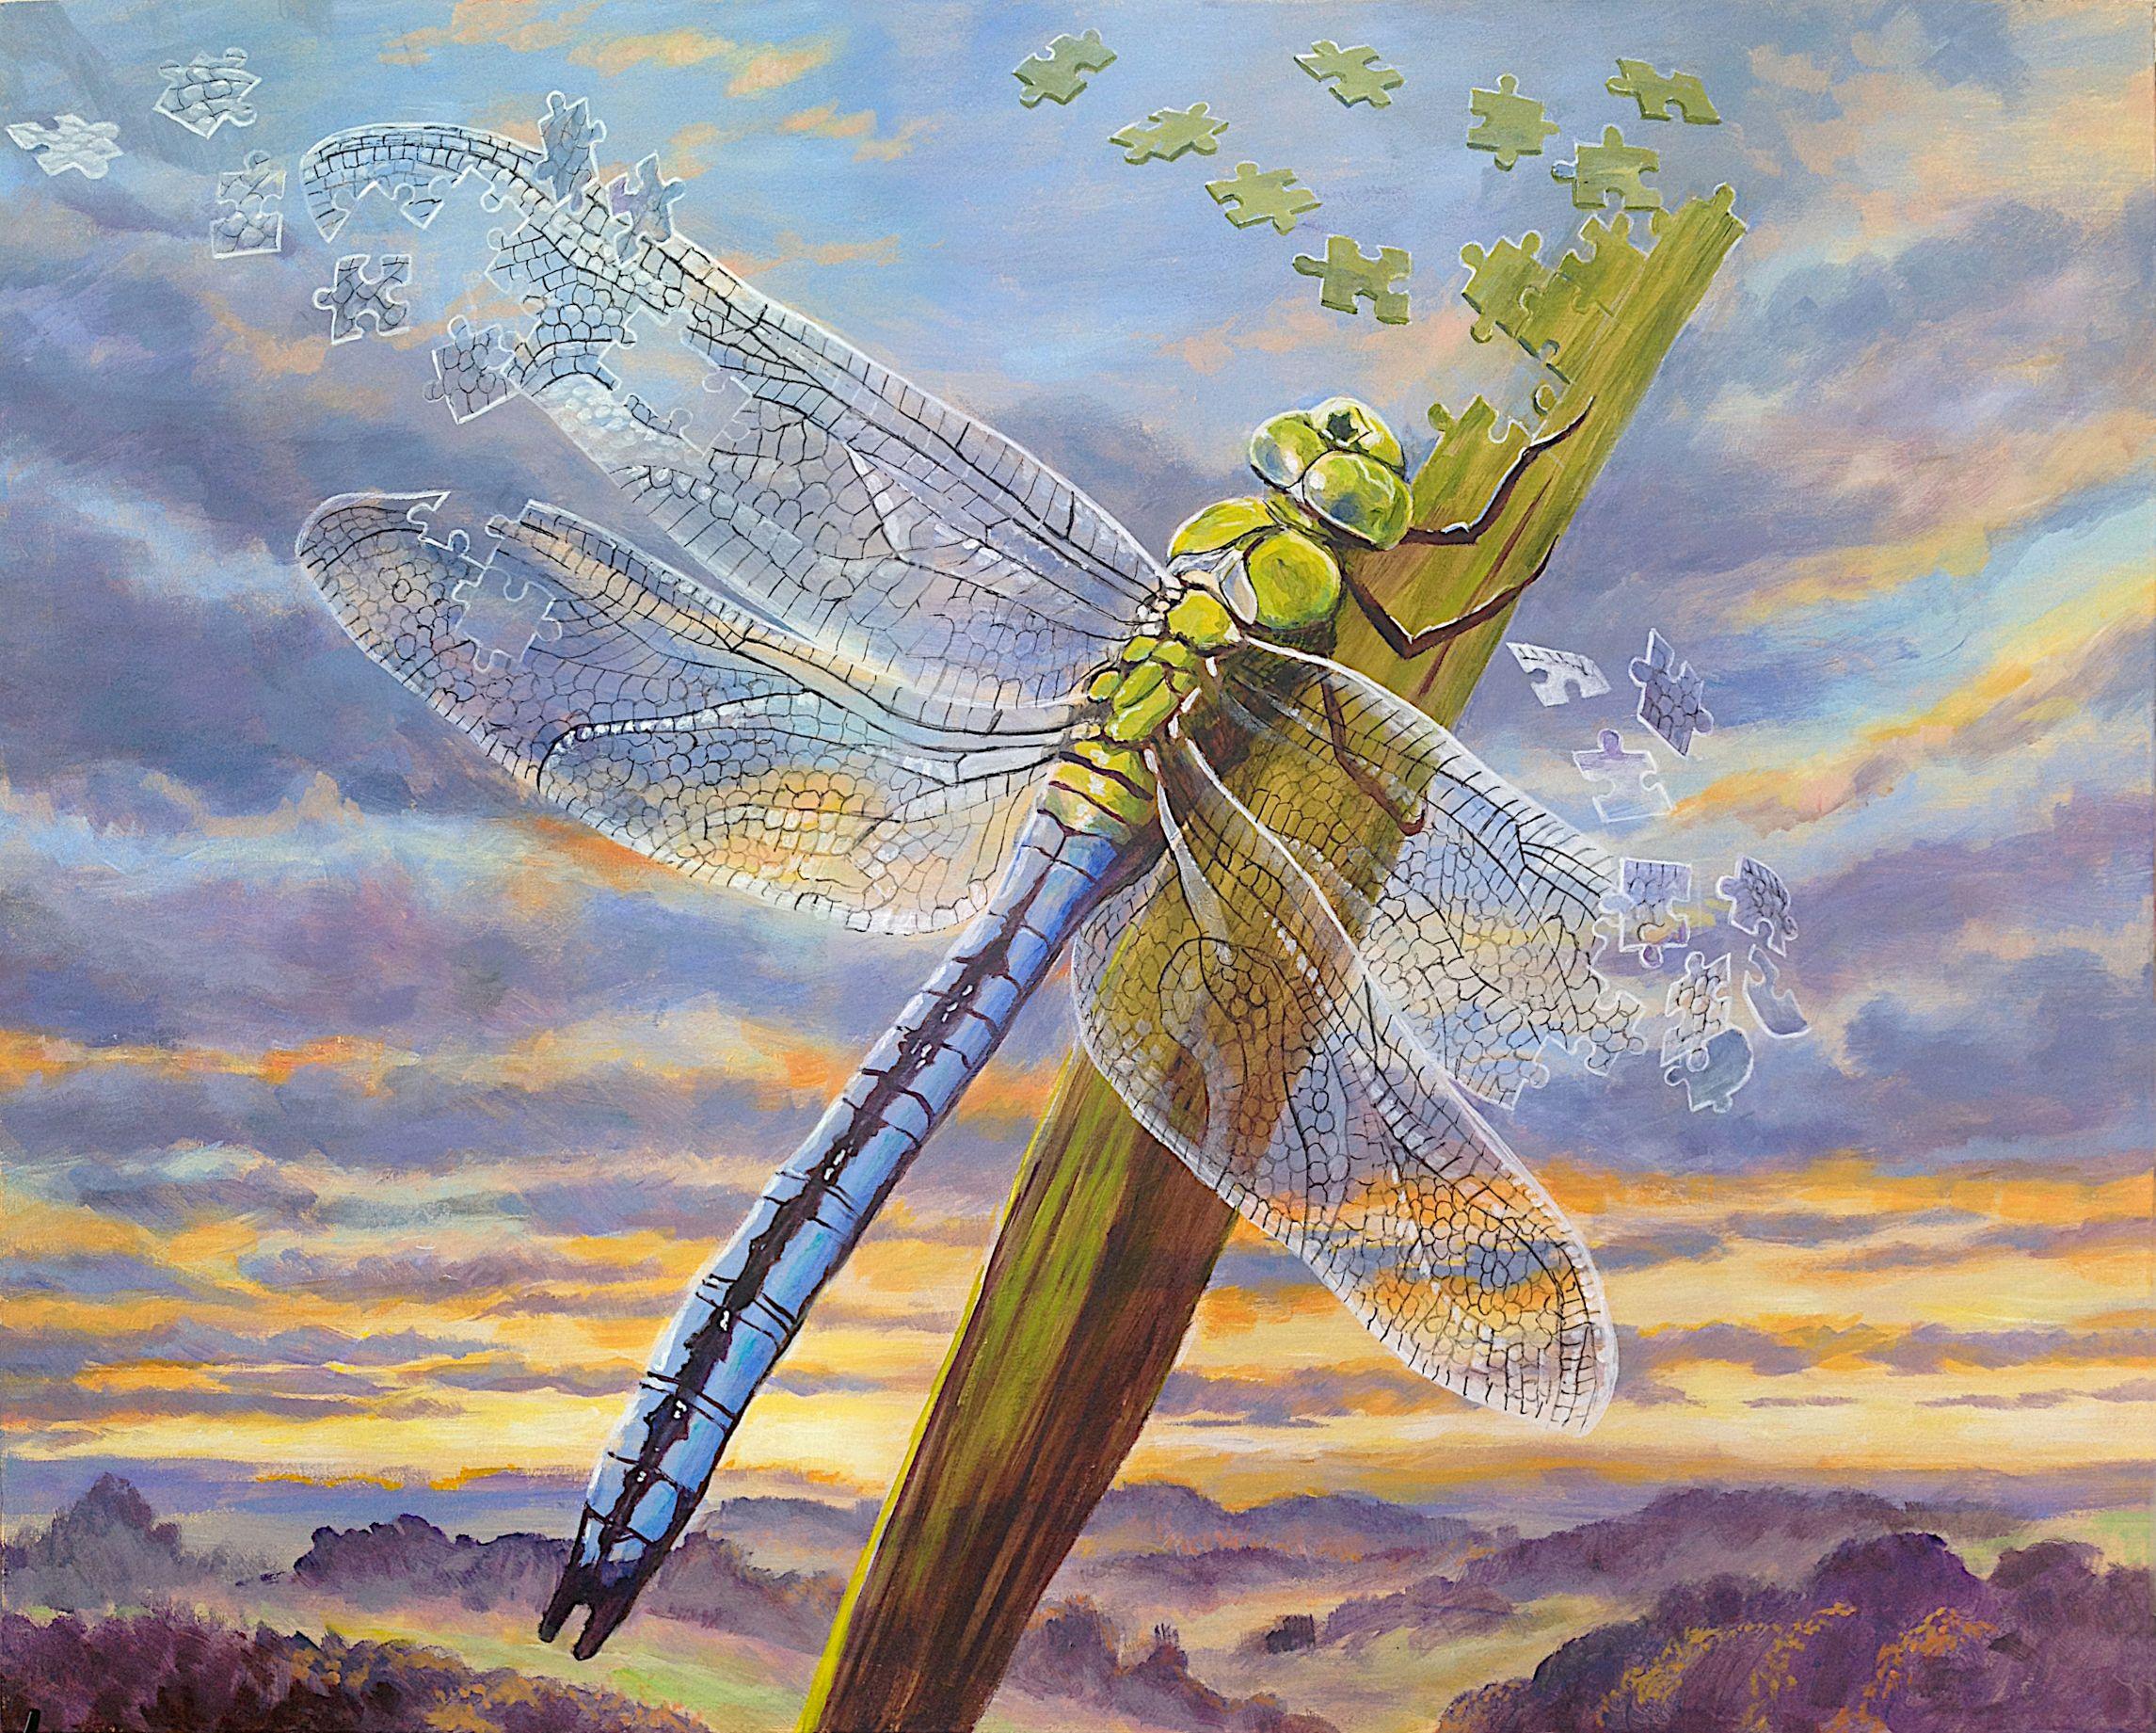 In Pieces - Dragonfly, Painting, Acrylic on MDF Panel